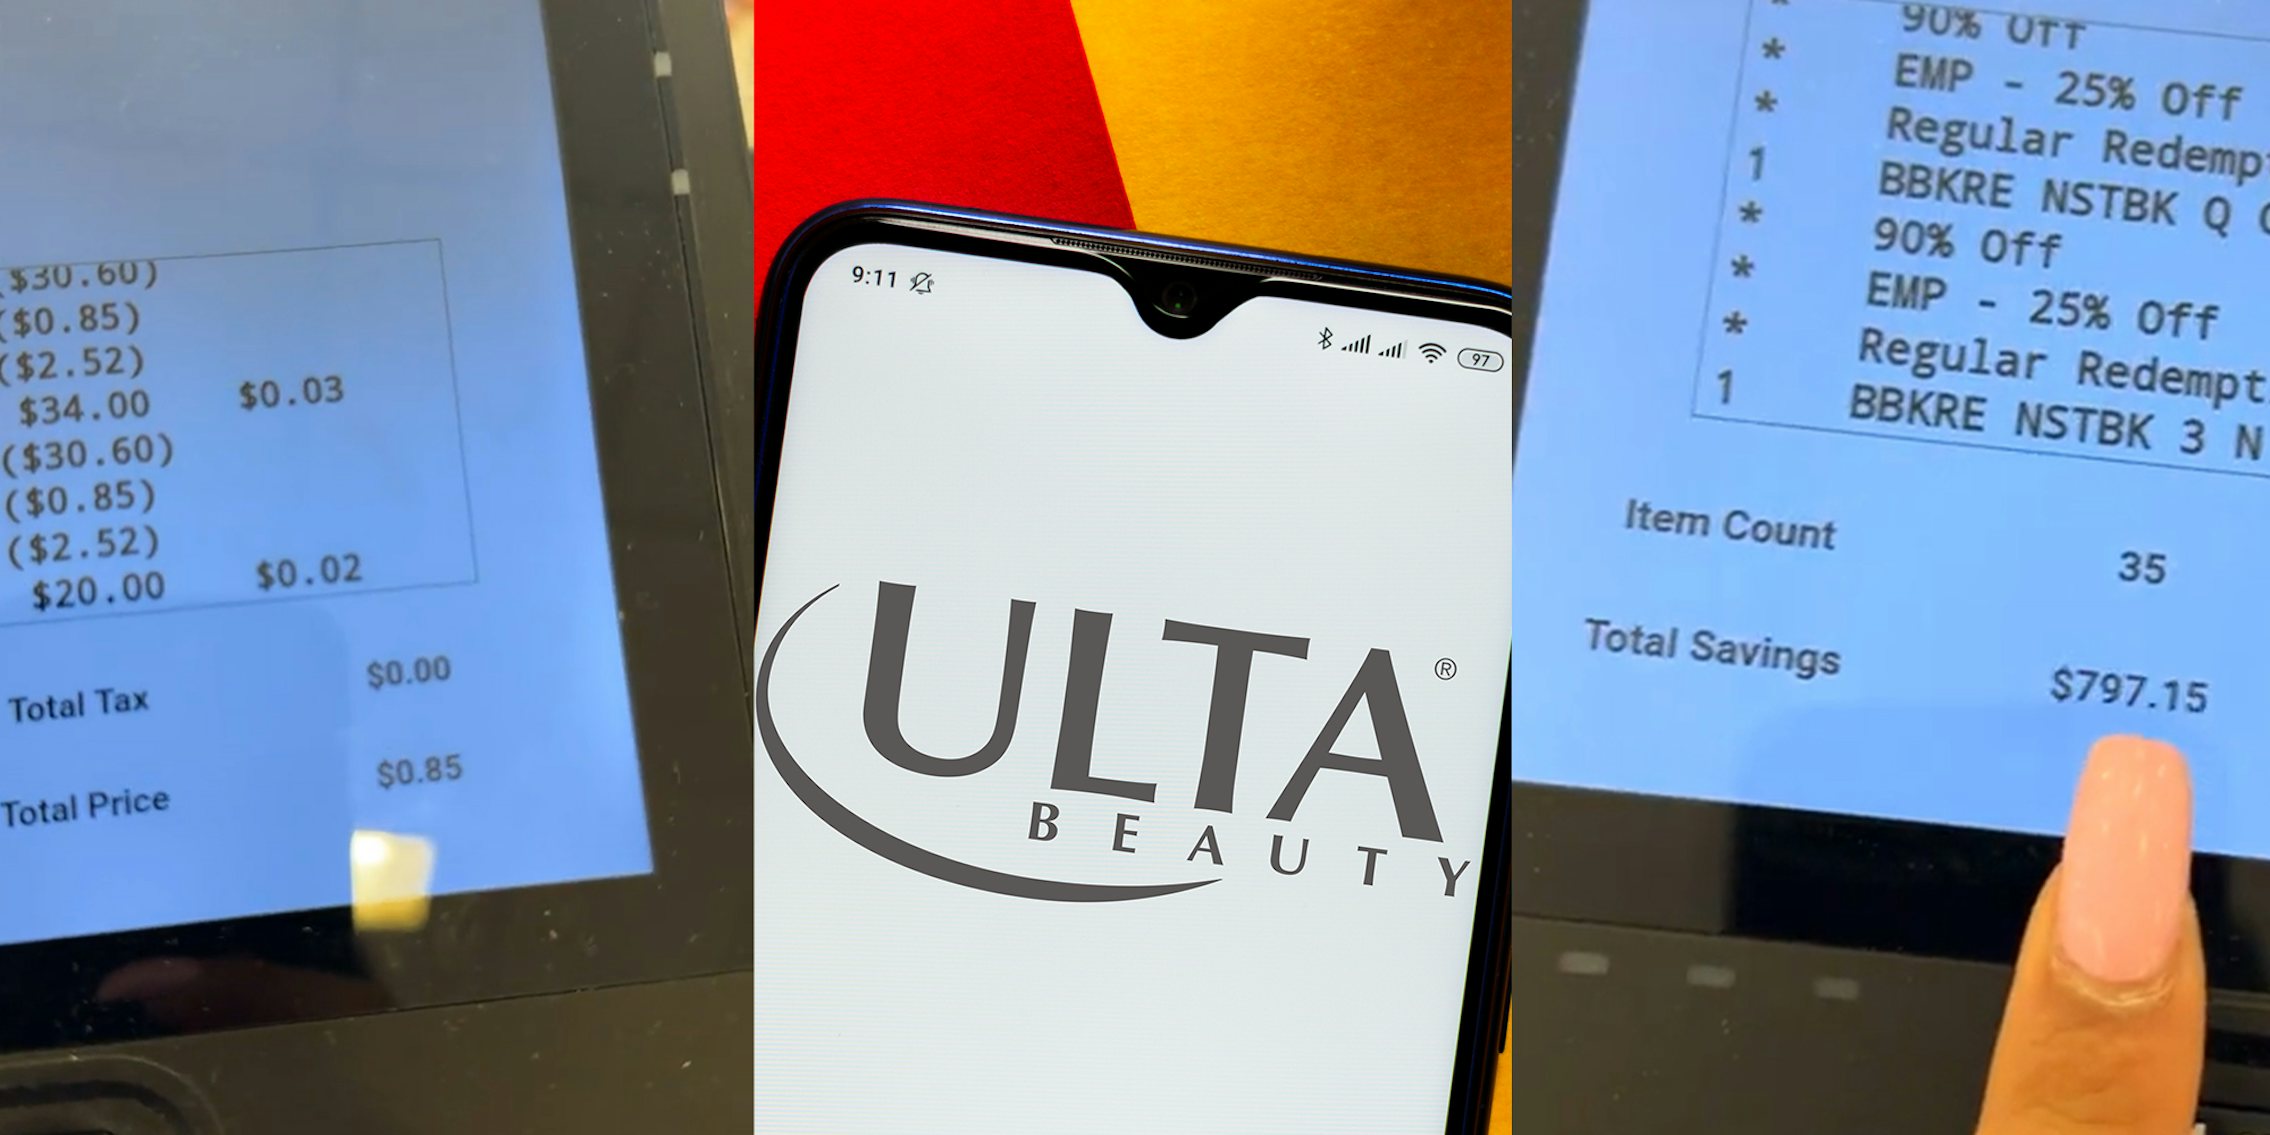 Register Screen showing total price and savings at Ulta Beauty; Ulta Beauty logo on phone display Infront red and yellow background